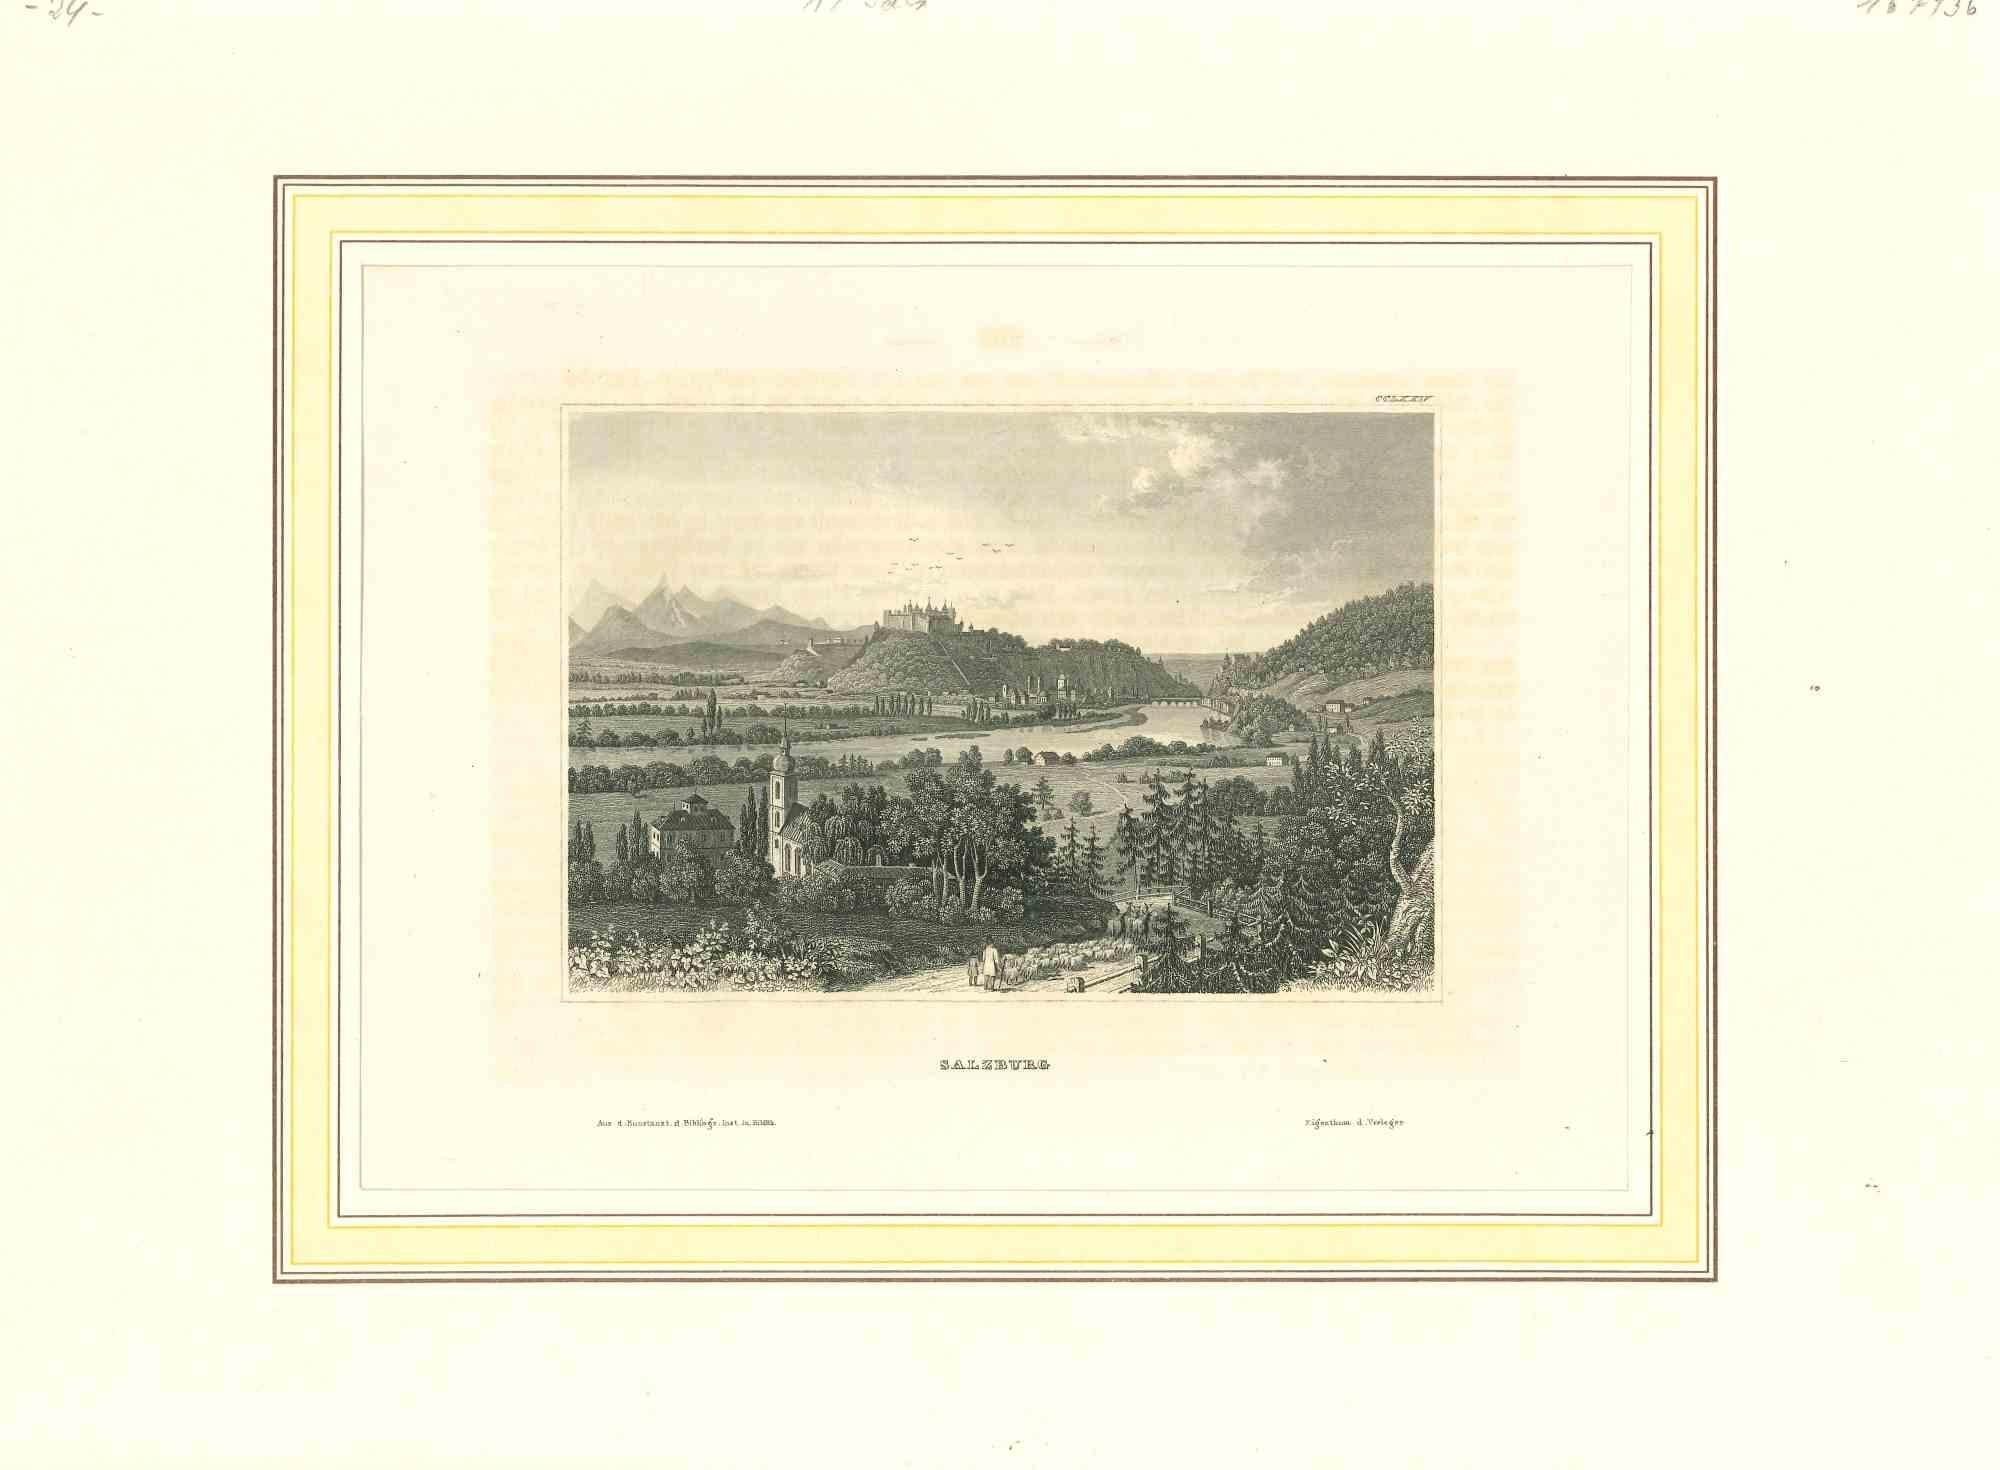 Unknown Landscape Print - Ancient View of Salzburg  - Original Lithograph on Paper - Early 19th Century